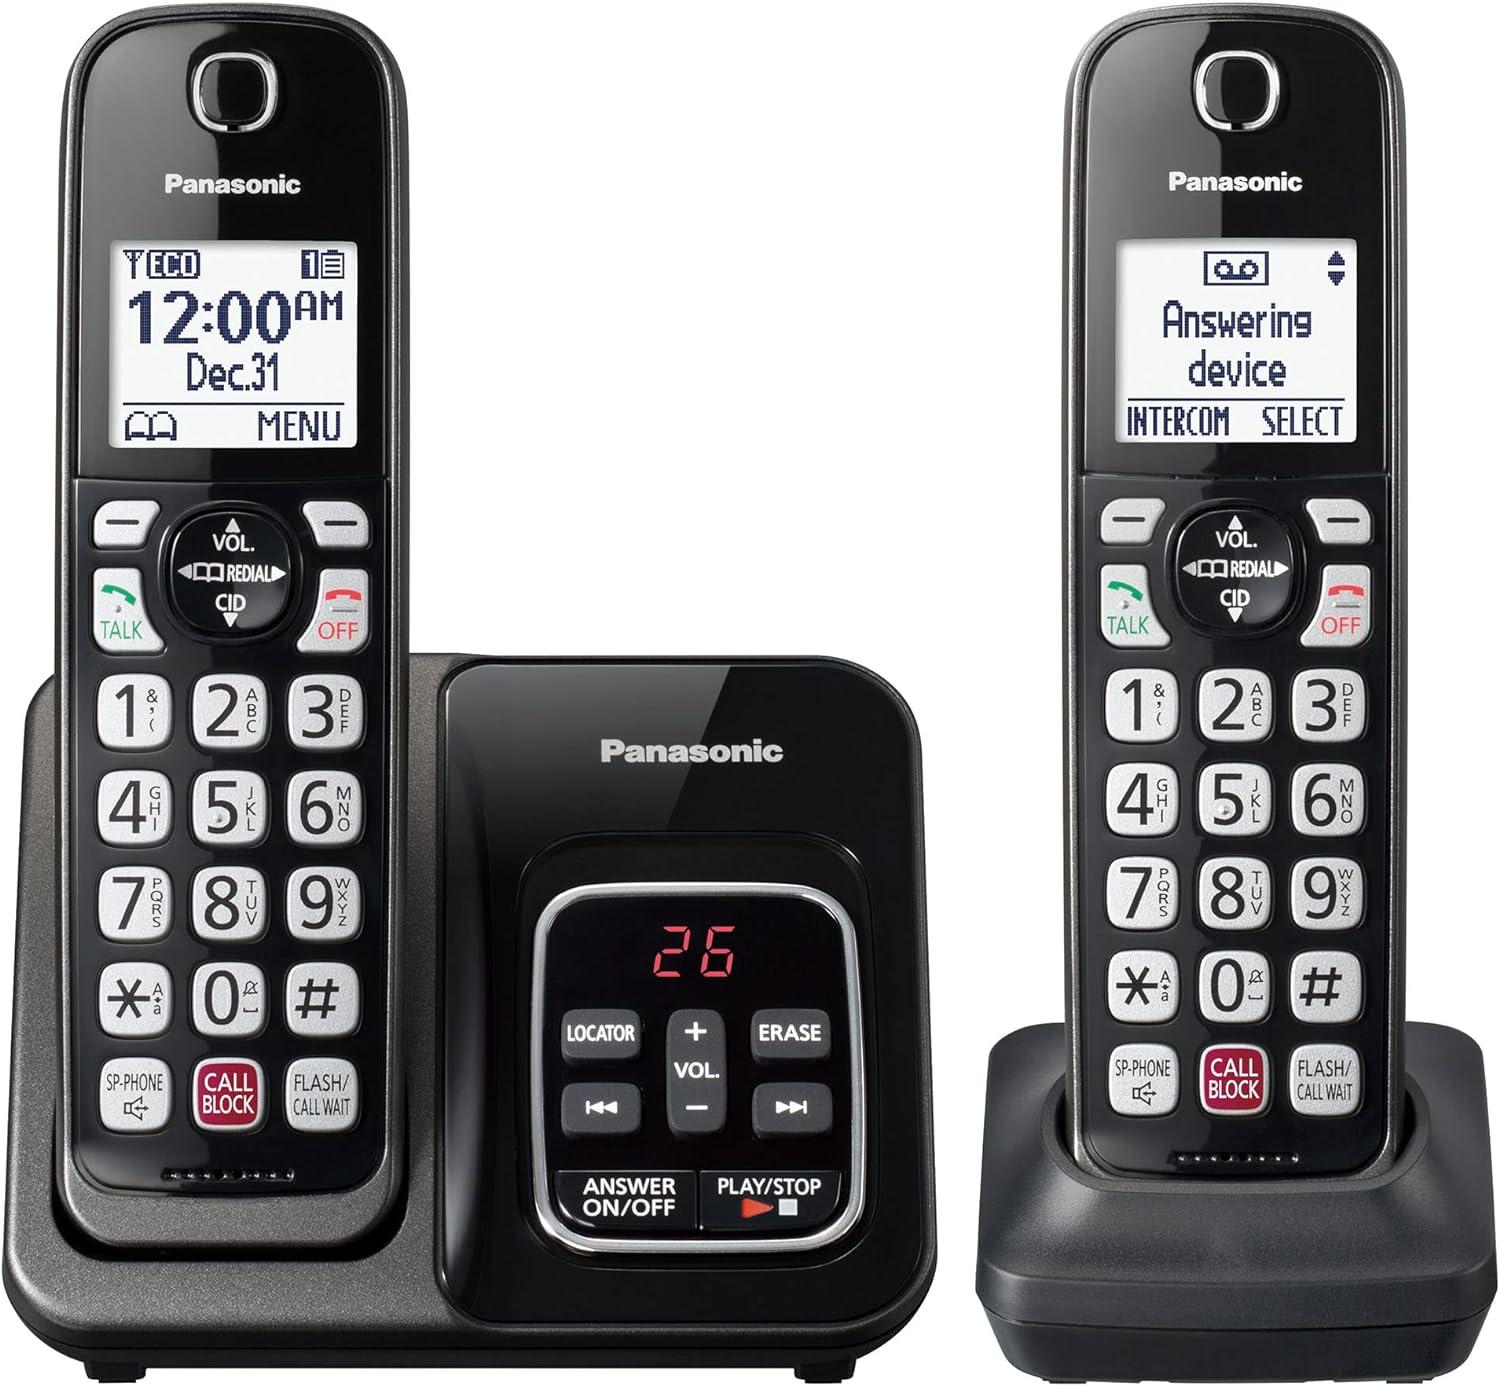 Panasonic Cordless Phone with Answering Machine for $39.49 Shipped